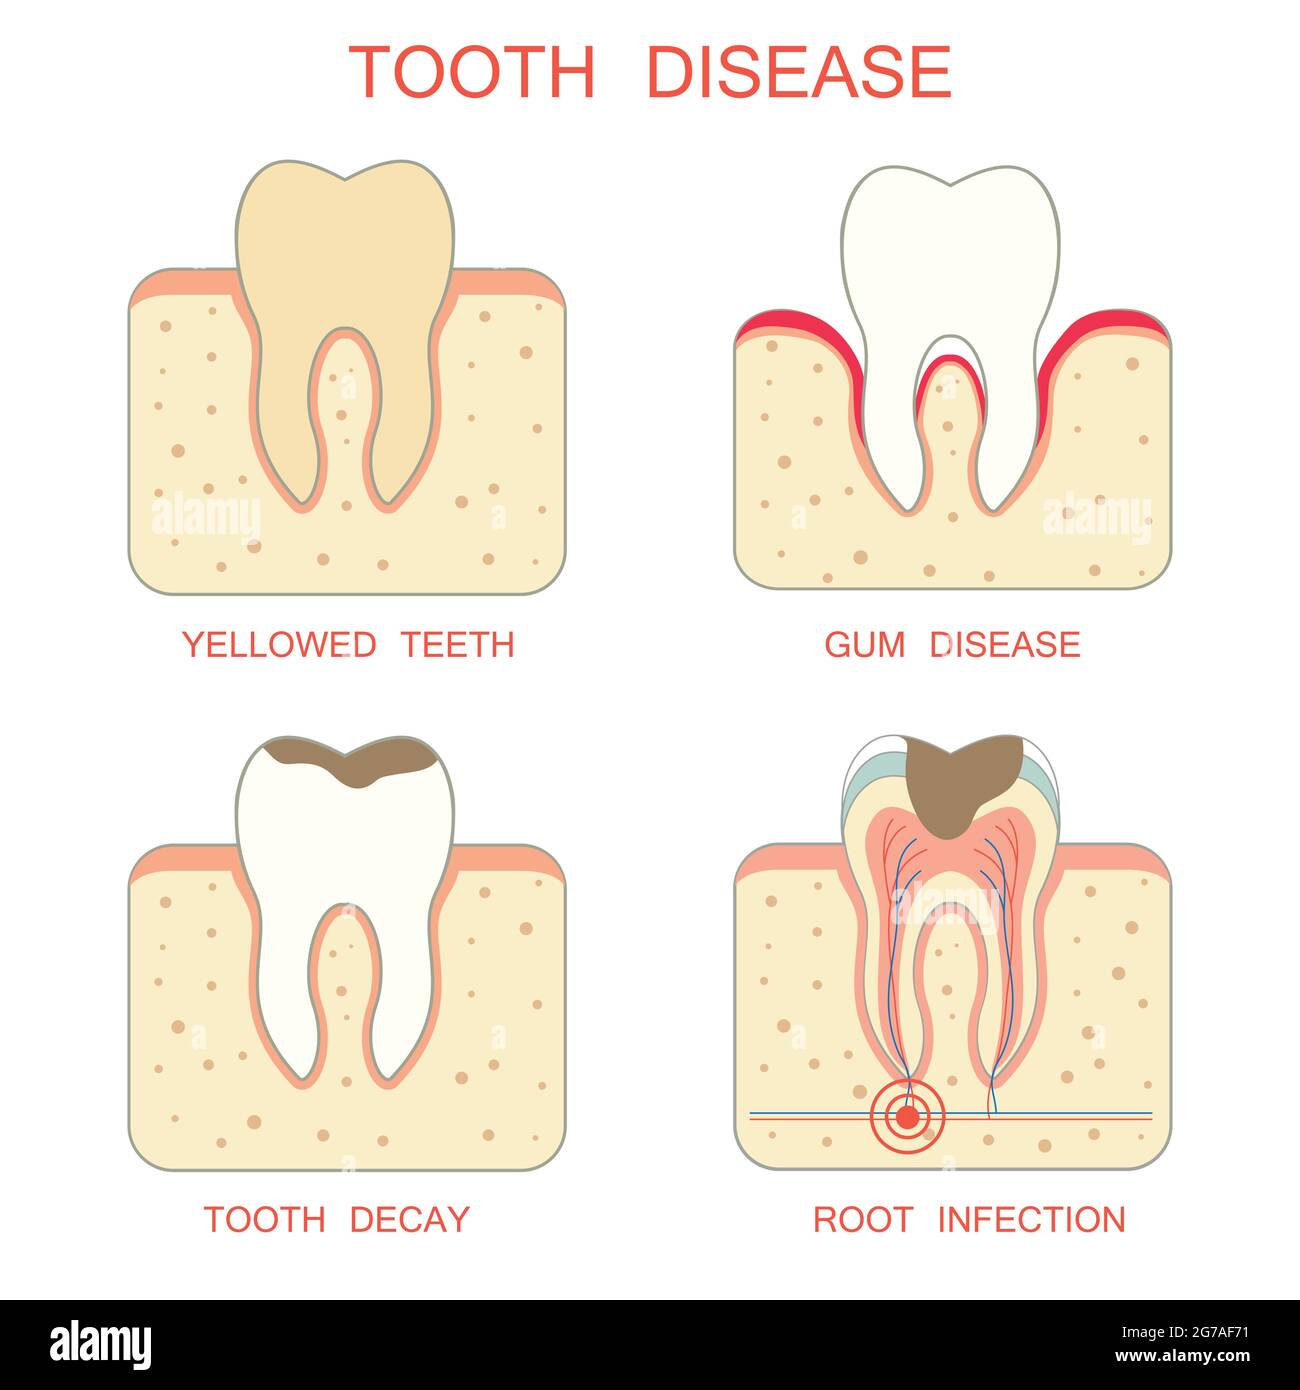 tooth decay disease,periodontal gum, yellowed teeth, root infection Stock Vector